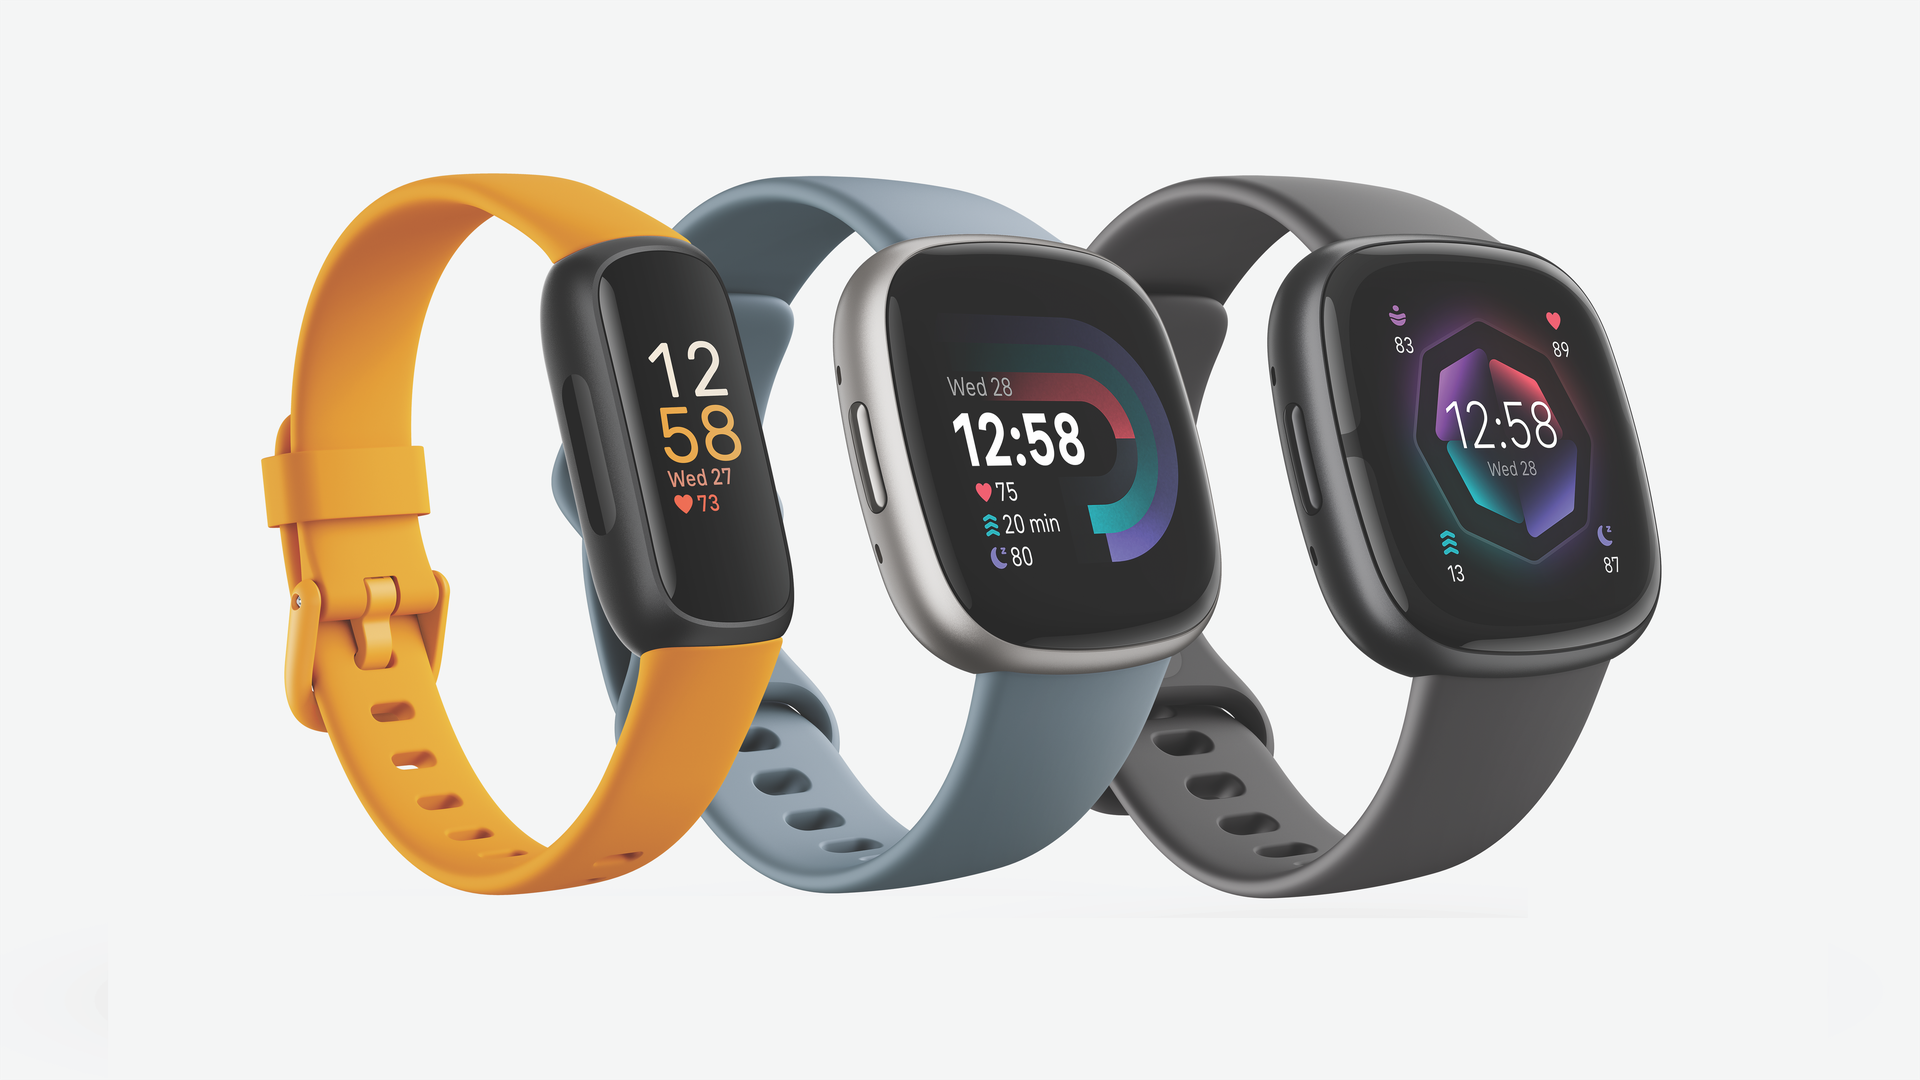 Google's fall 2022 Fitbit lineup: the Inspire 3, Versa 4 and Sense 2.